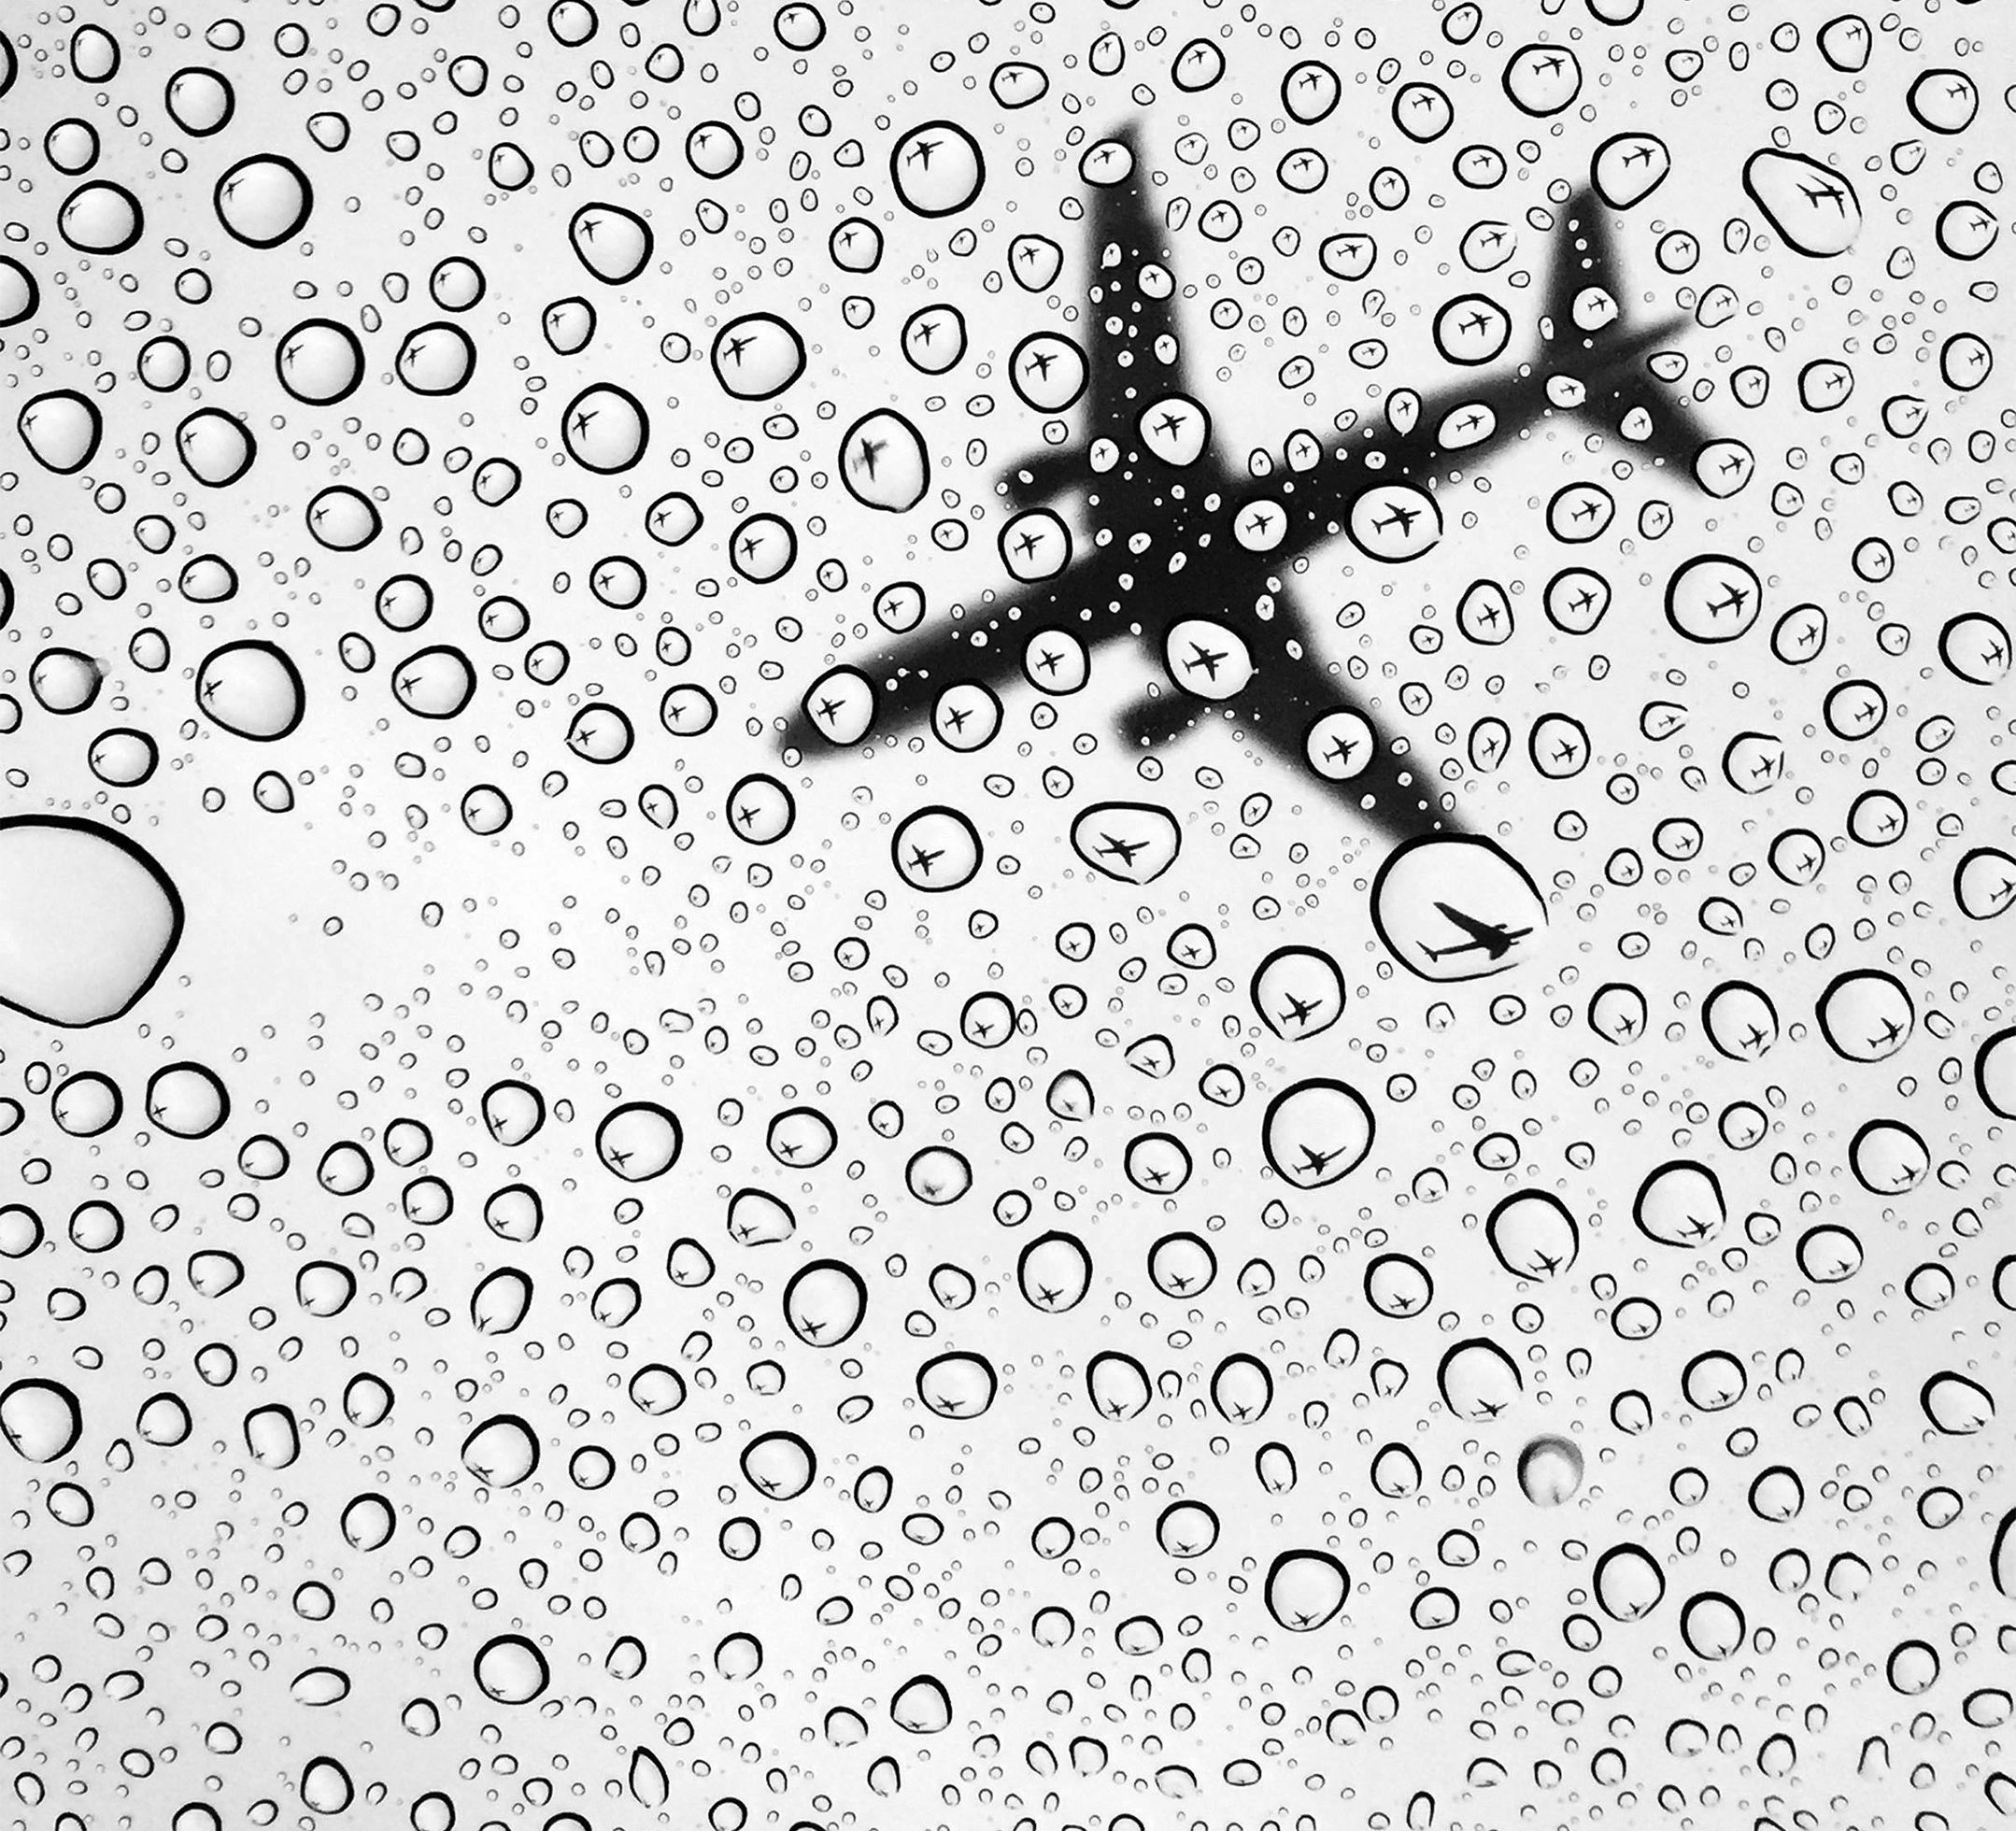 A passenger plane overhead at the Detroit Metro Airport seen from beneath clear glass or plastic covered with water droplets. Inside some of the droplets is the complete reflection of the plane.